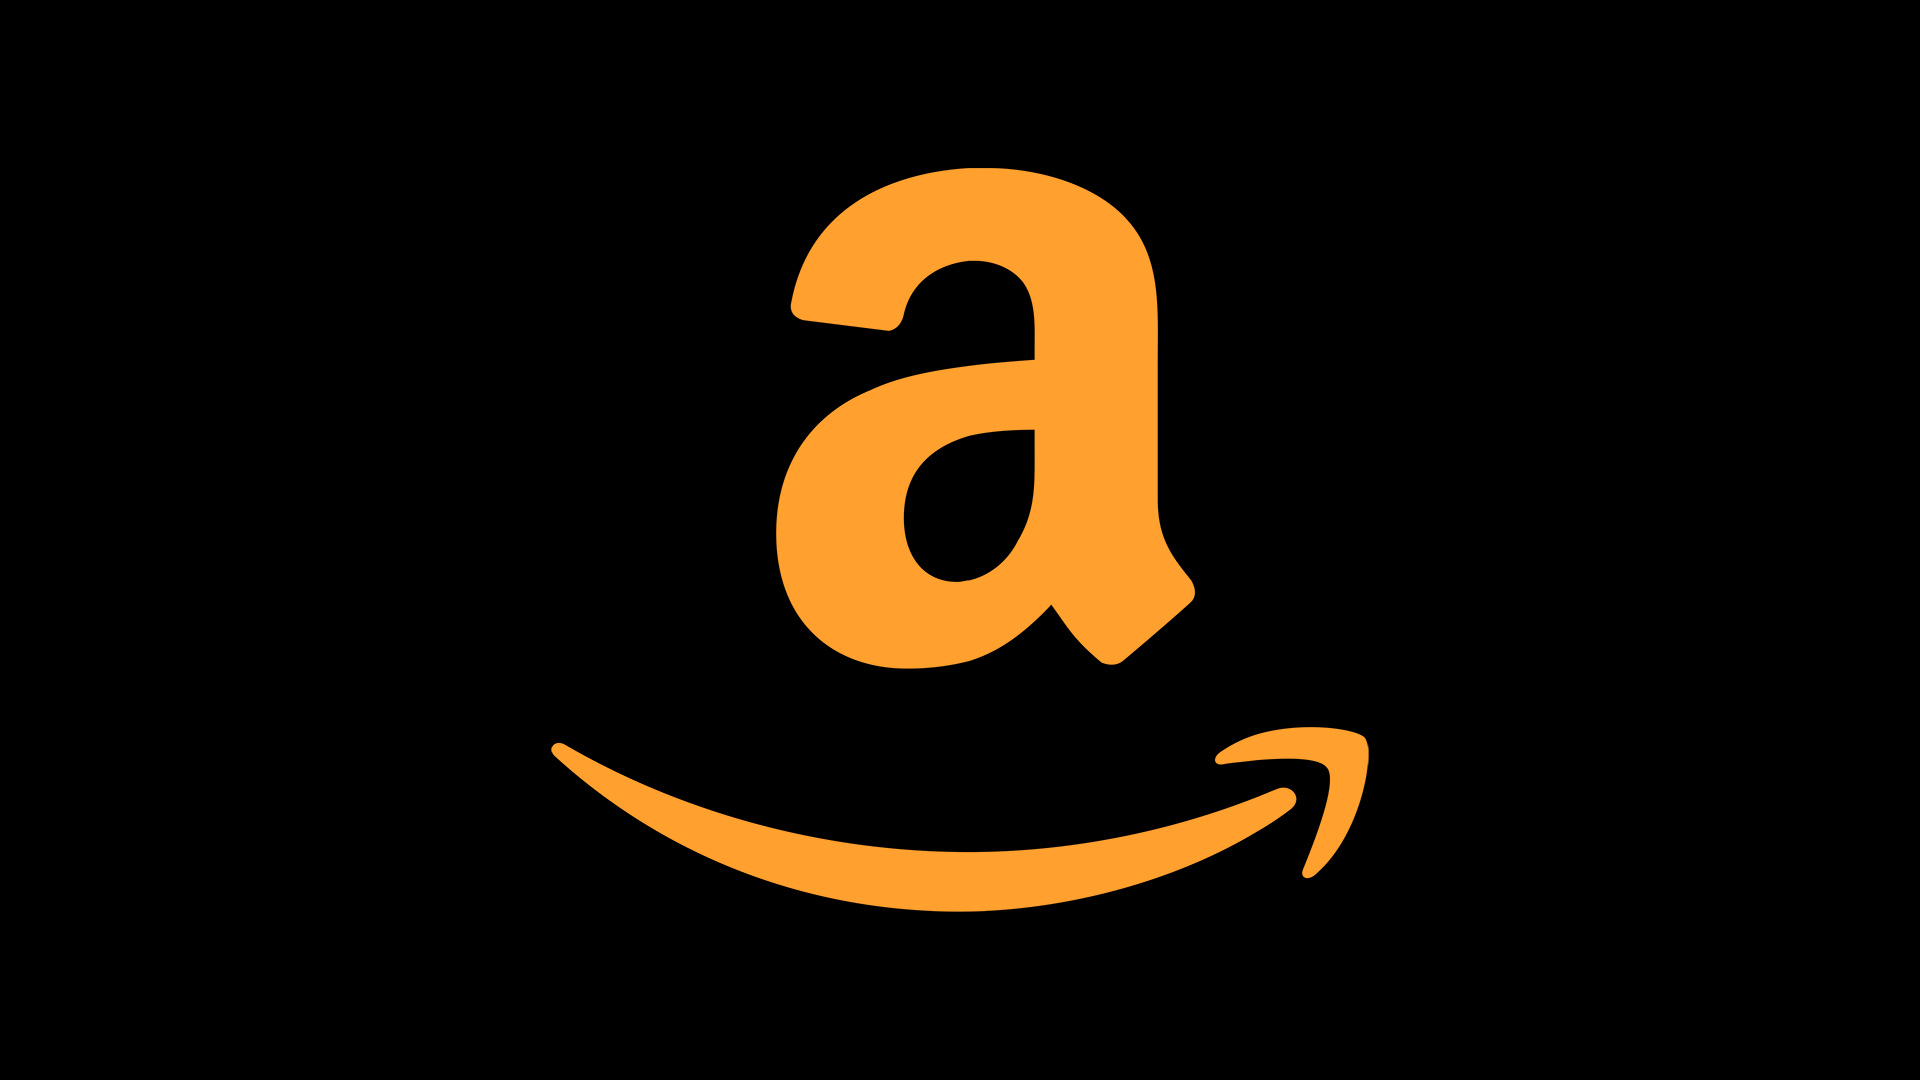 Cool Amazon Logo - Amazon Logo Png (93+ images in Collection) Page 2